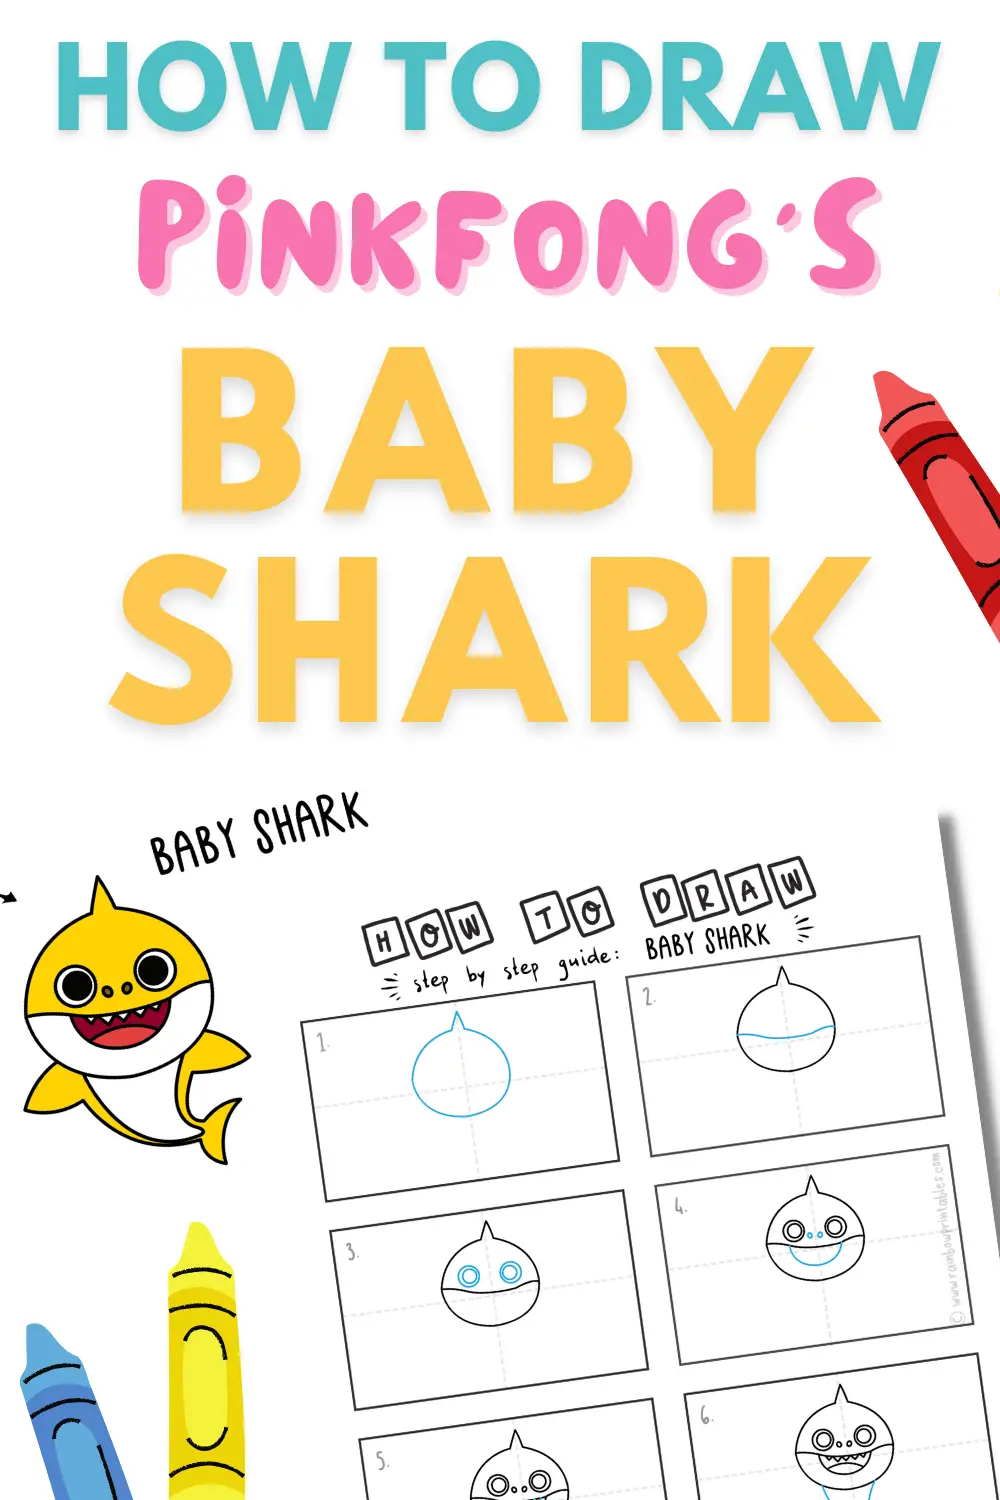 How To Draw Baby Shark (Pinkfong) Super Easy Art Guide For Kids